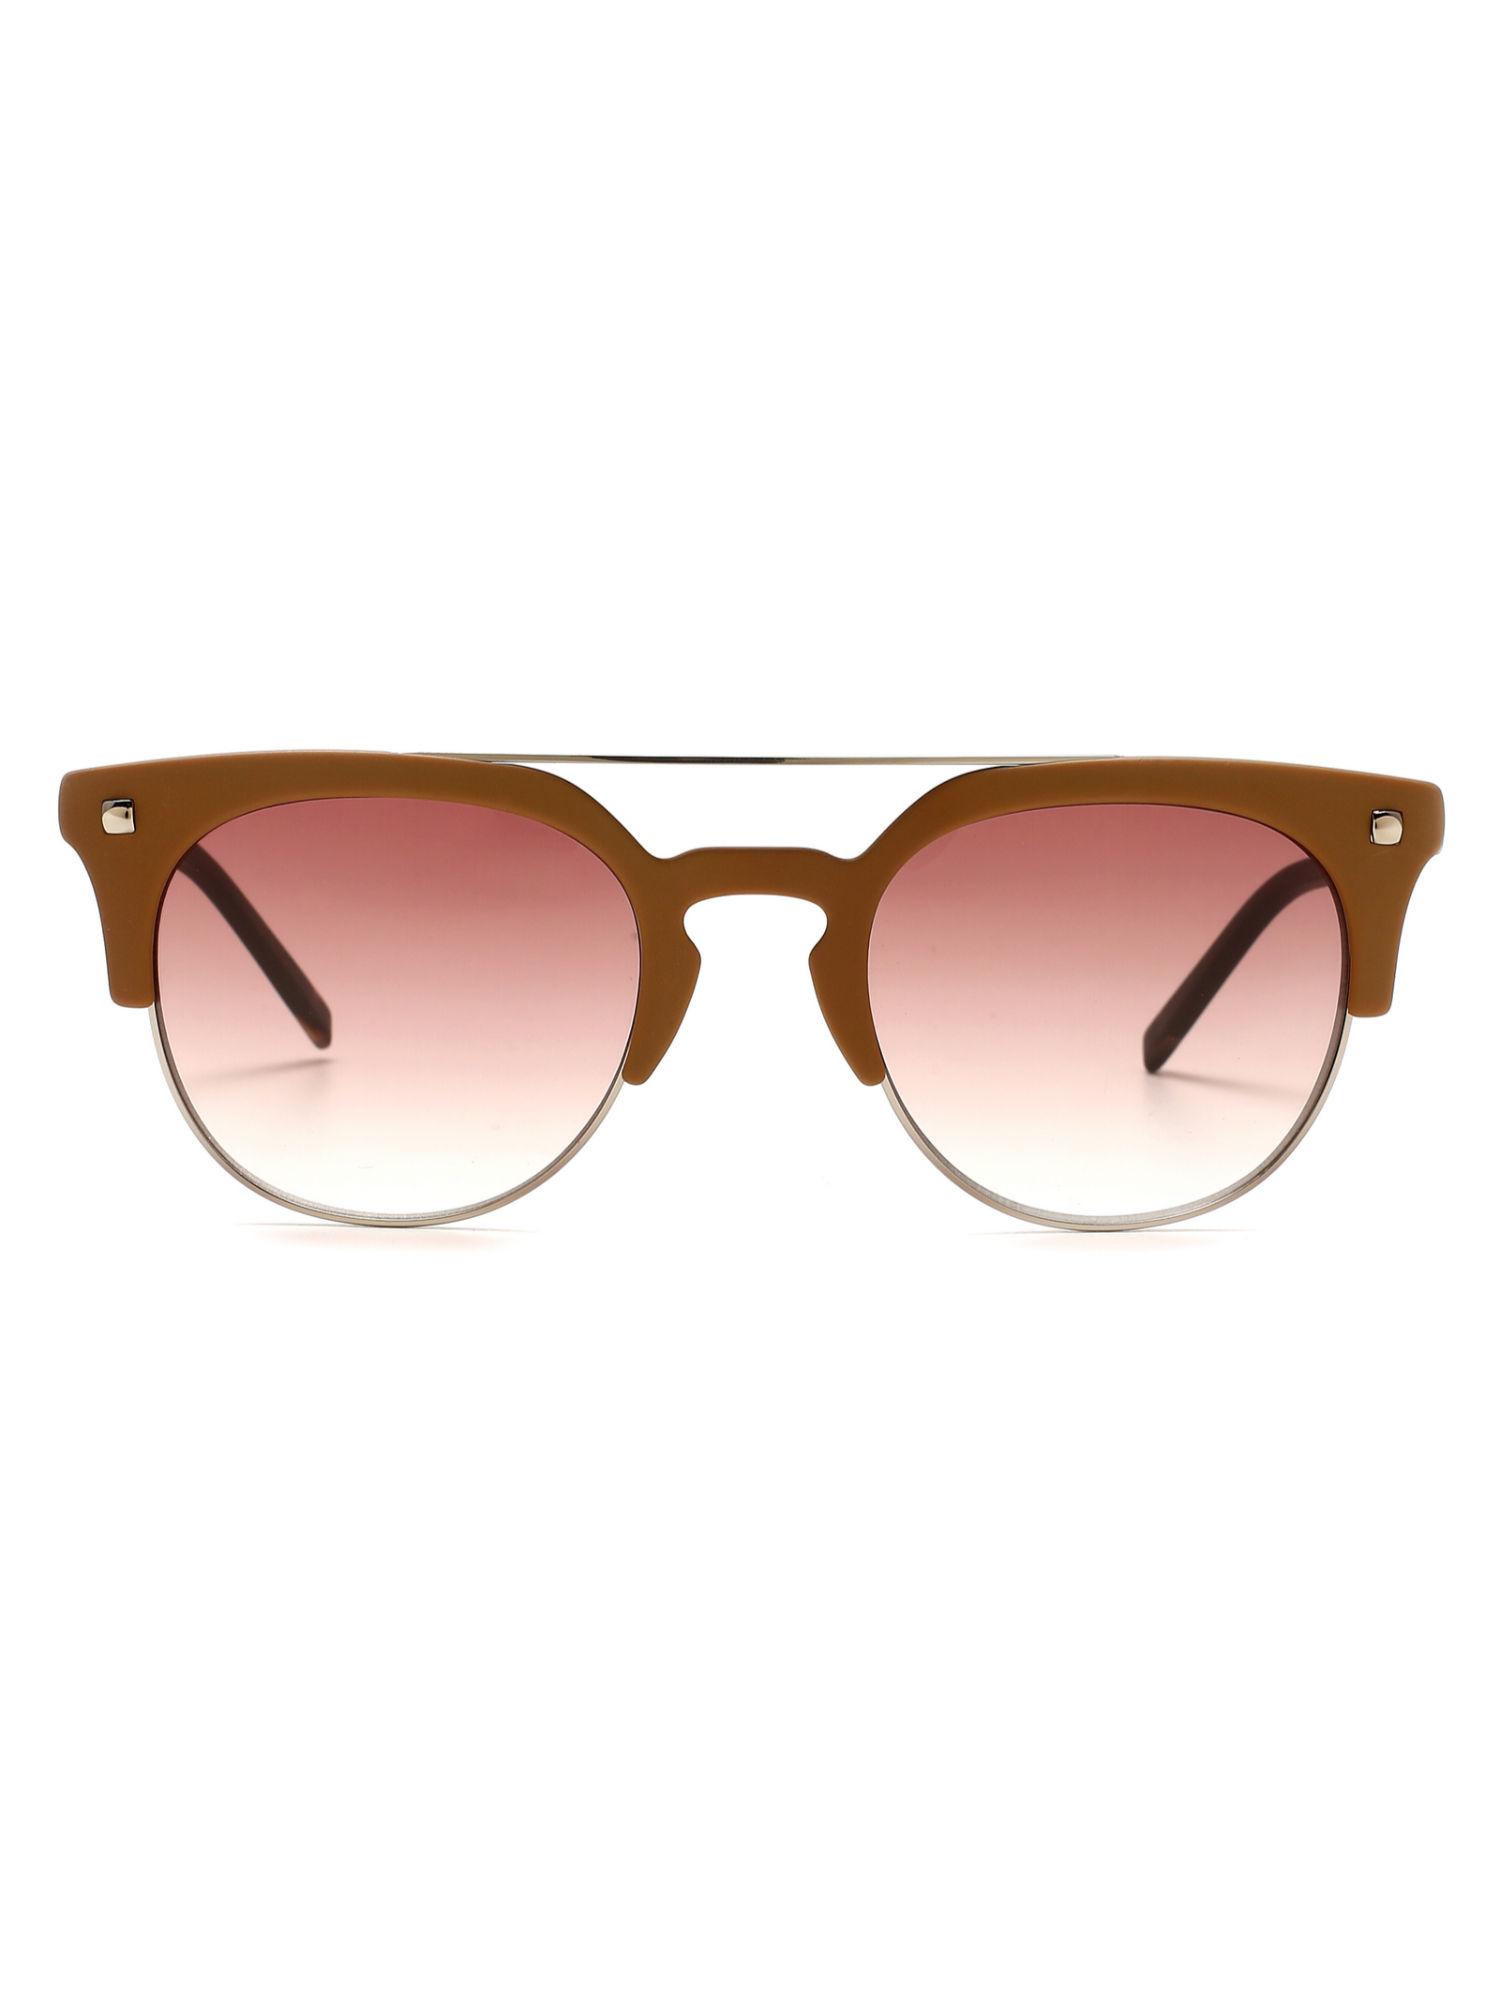 round sunglasses with pink lens for men